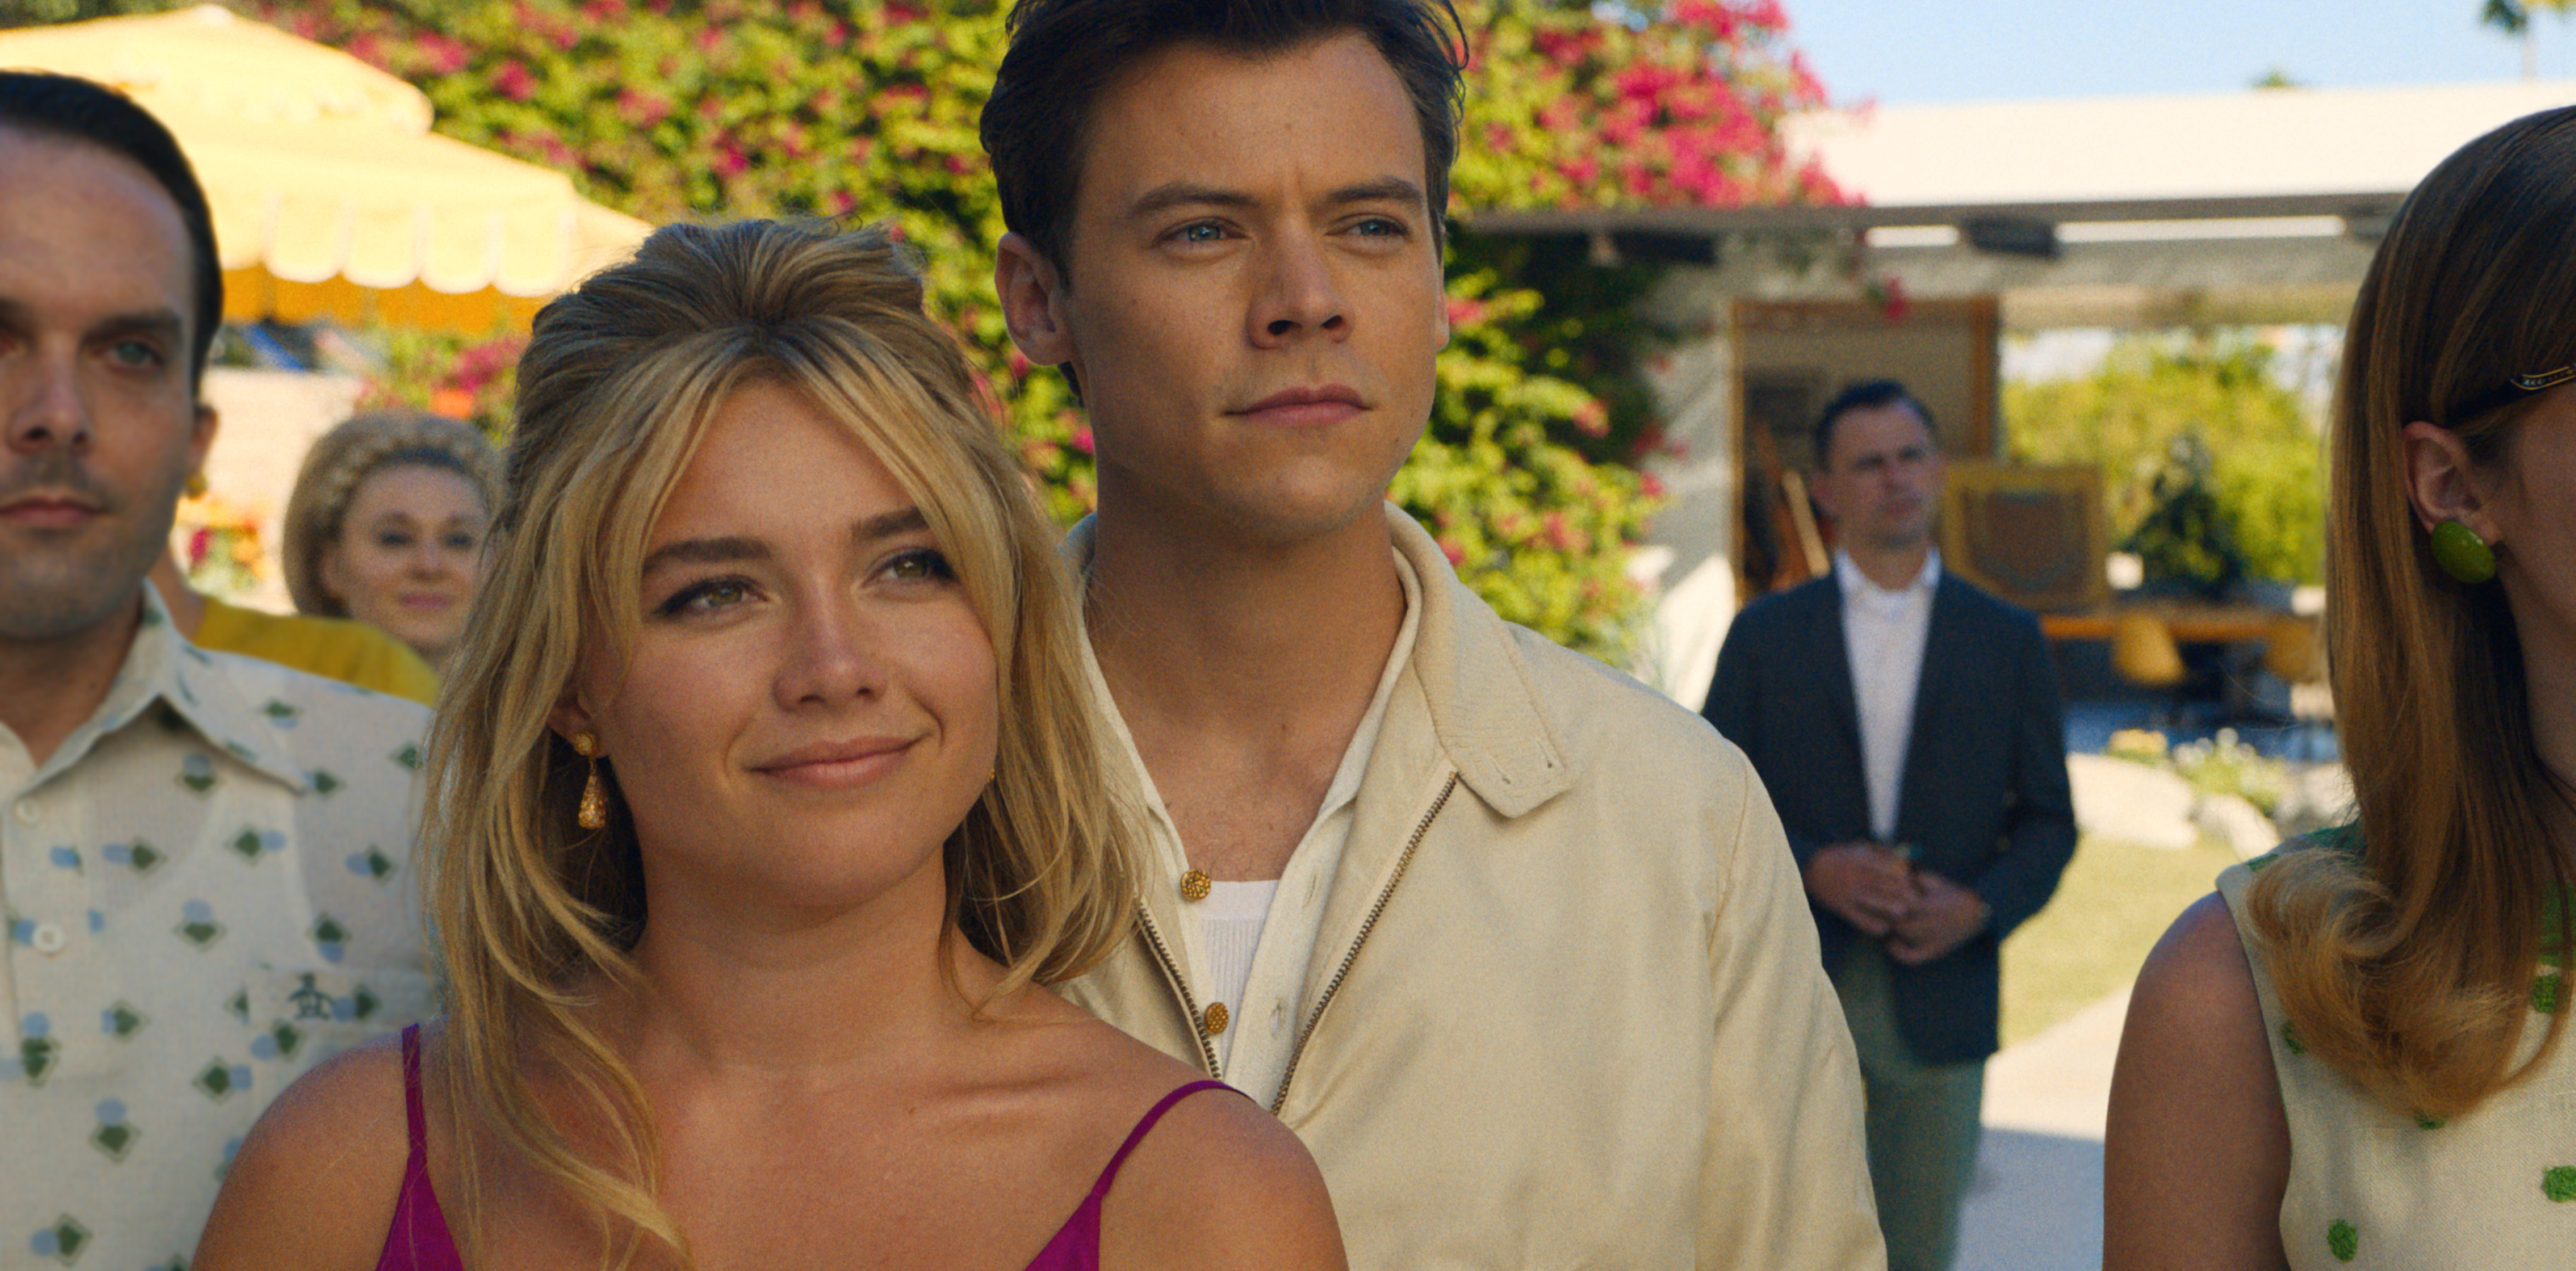 Florence Pugh and Harry Styles are pictured in a film still